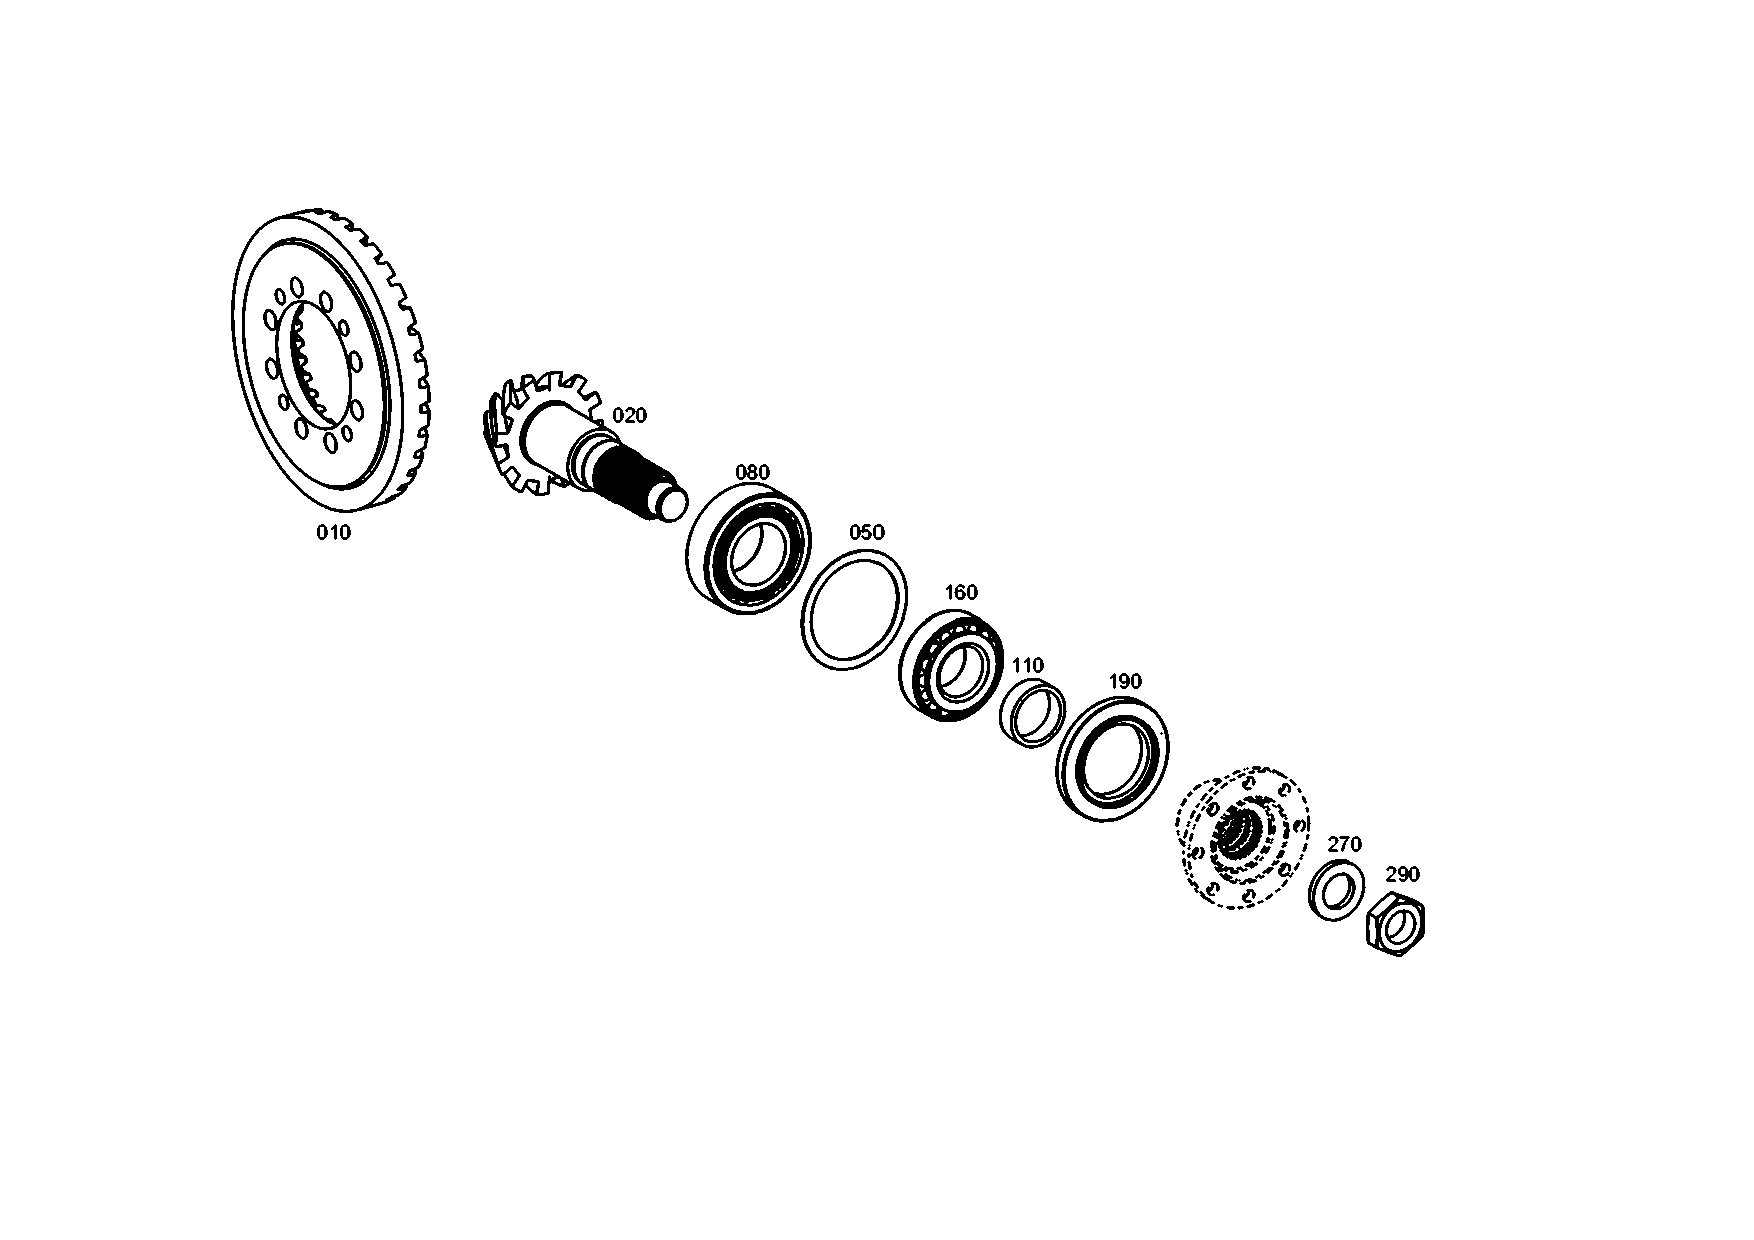 drawing for CATERPILLAR INC. 7029700 - RING (figure 1)